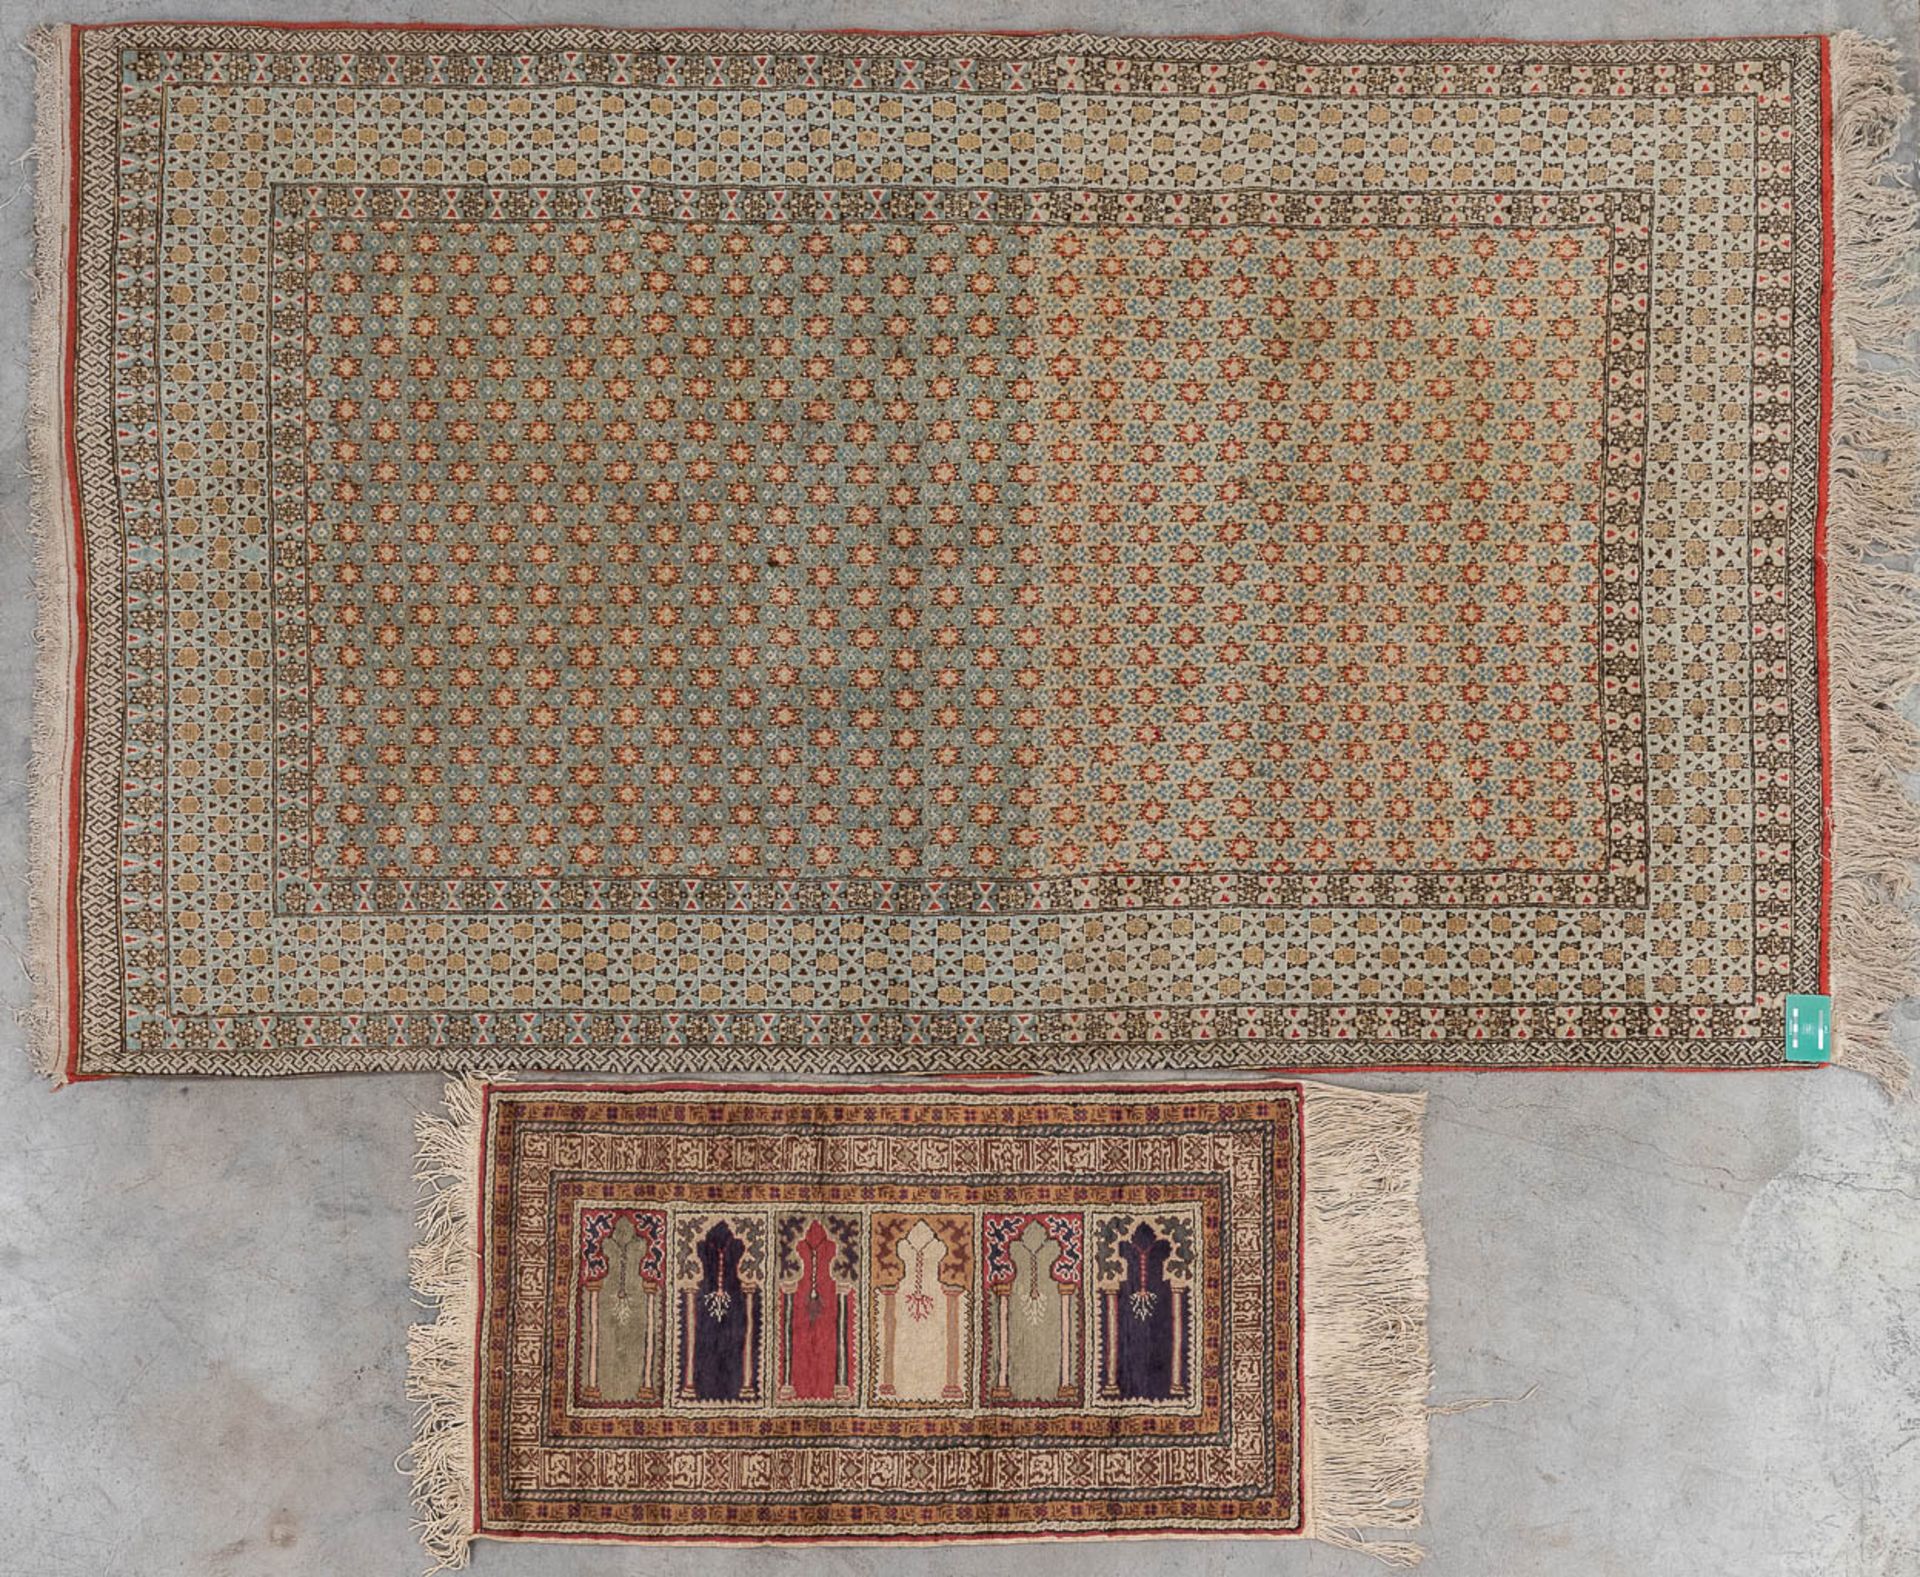 A collection of 2 Oriental hand-made carpets. Persia. (L: 220 x W: 134 cm) - Image 2 of 10